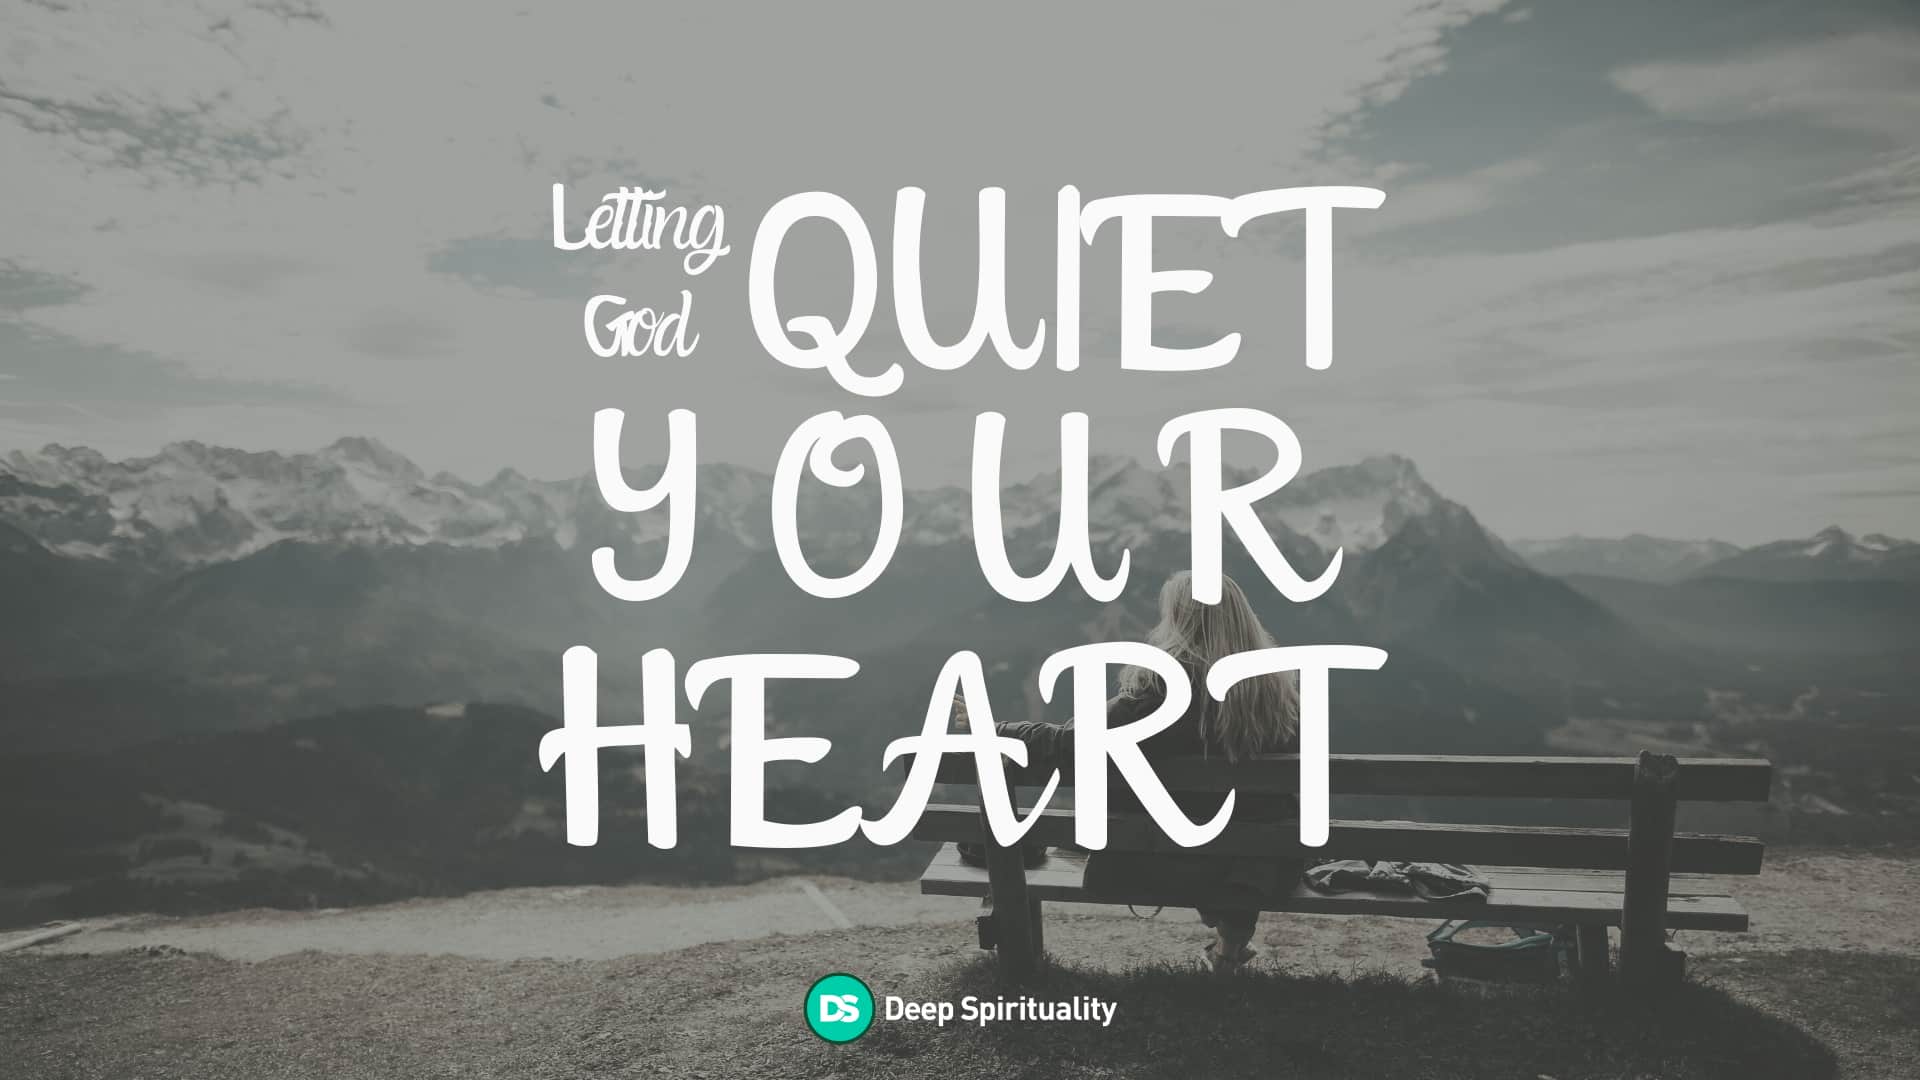 The Ultimate Guide to Letting God Quiet Your Heart 18